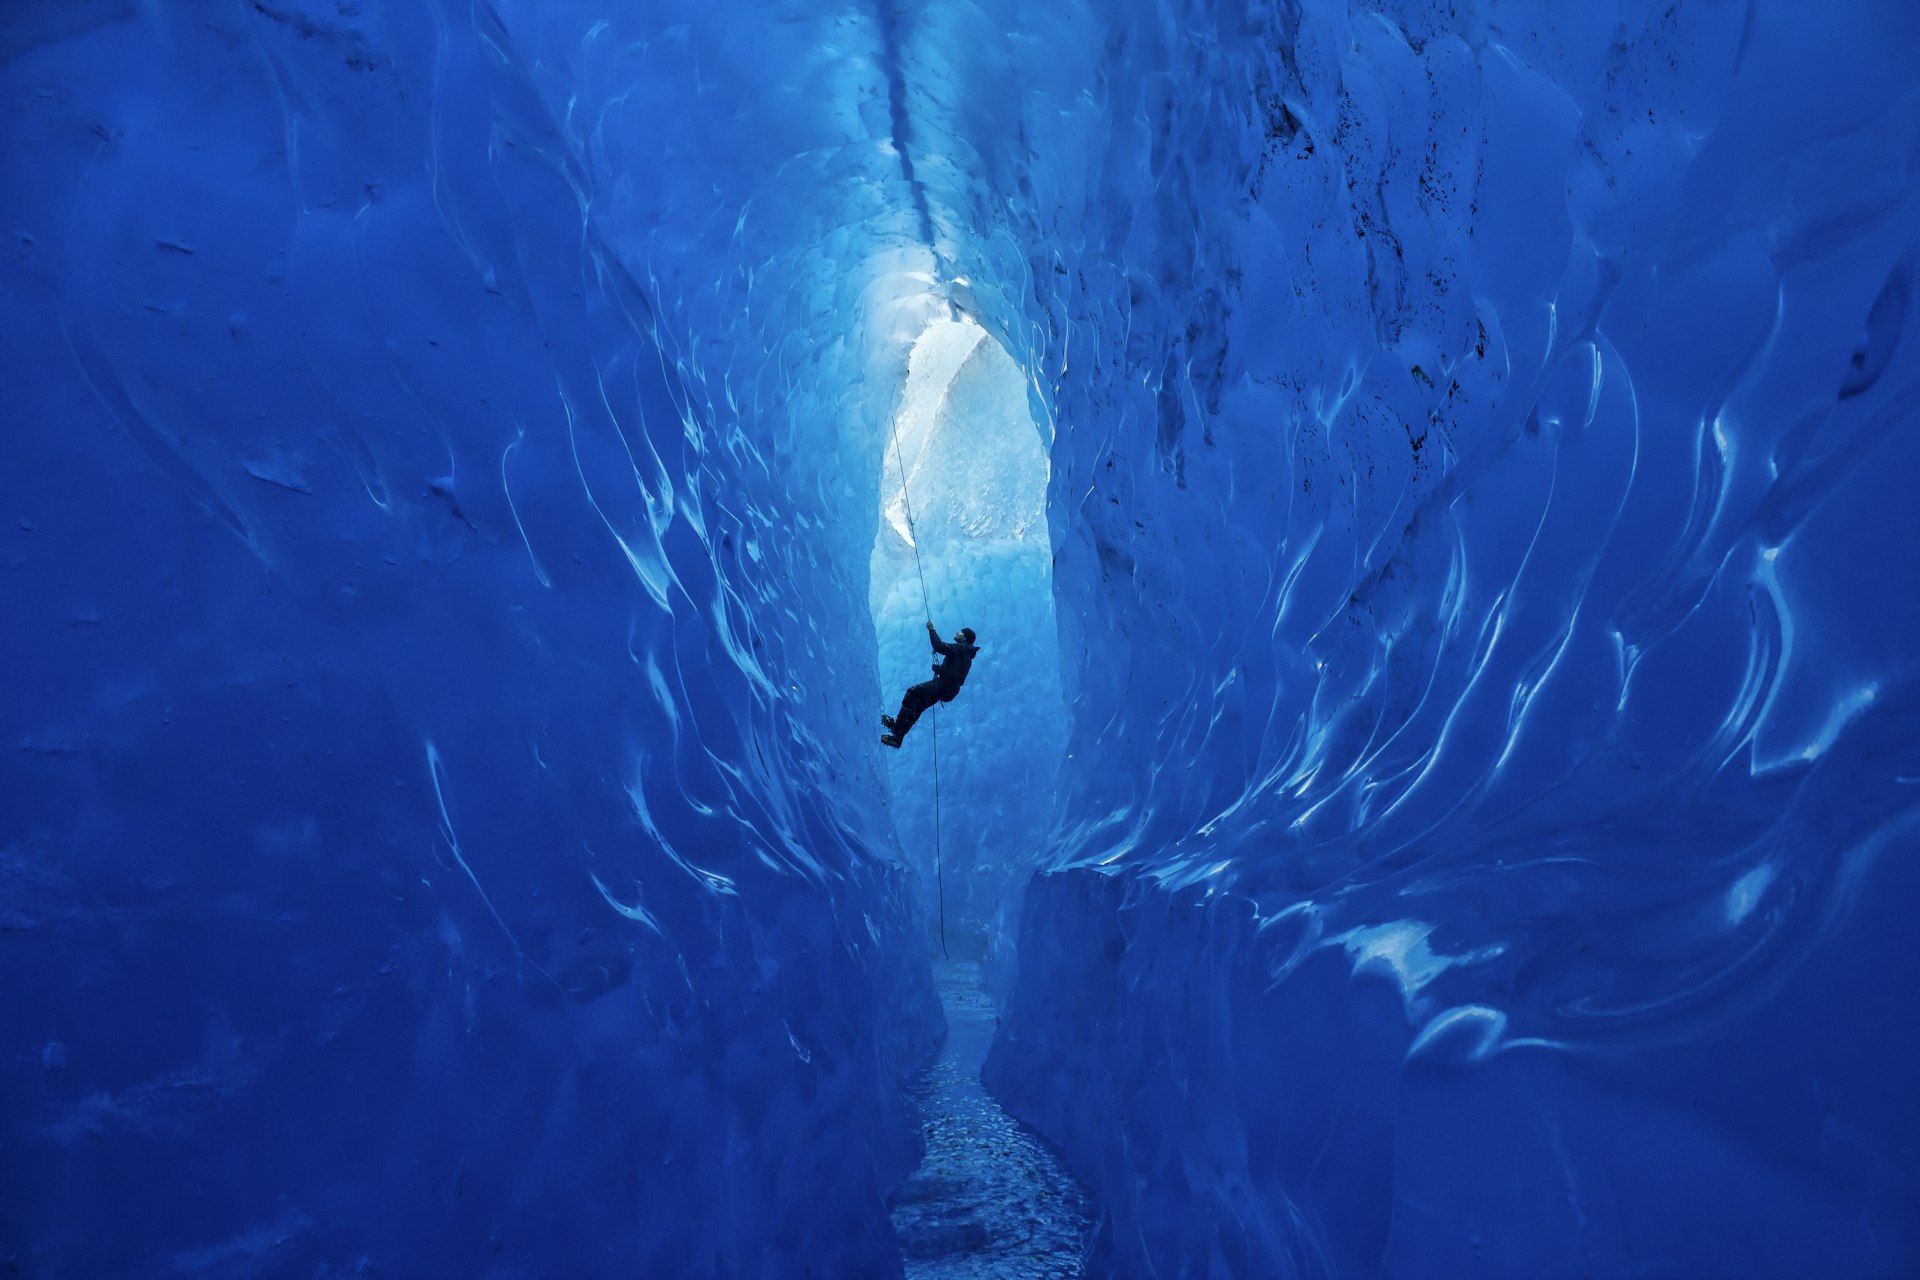 A climber rappels into an ice cave on the Mendenhall Glacier